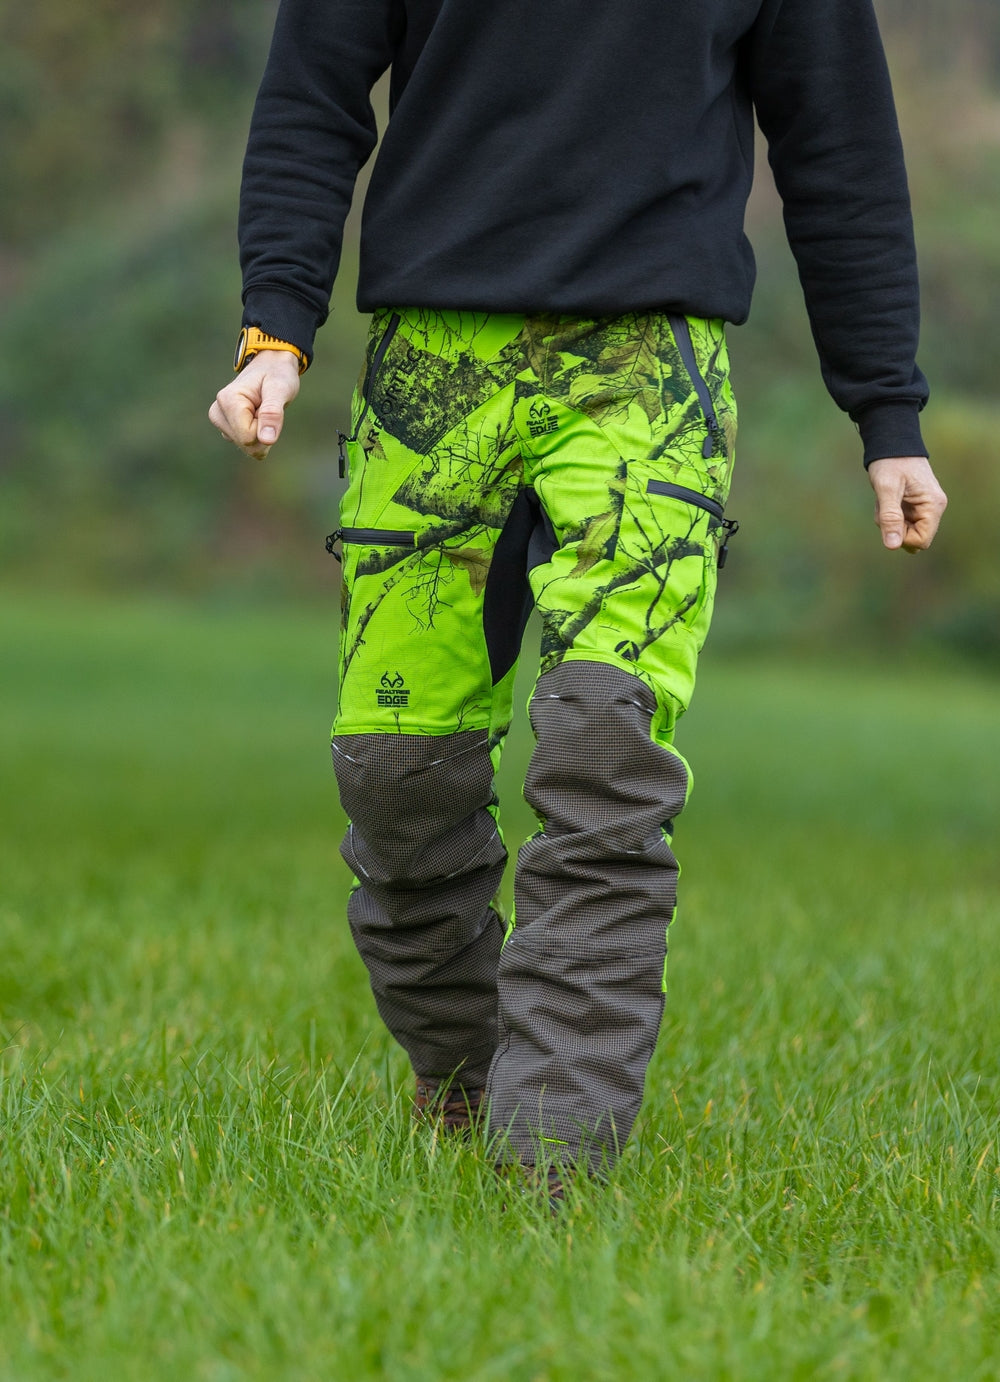 AT4070 - Breatheflex Pro Realtree Chainsaw Trousers Design C/Class 1 - Lime